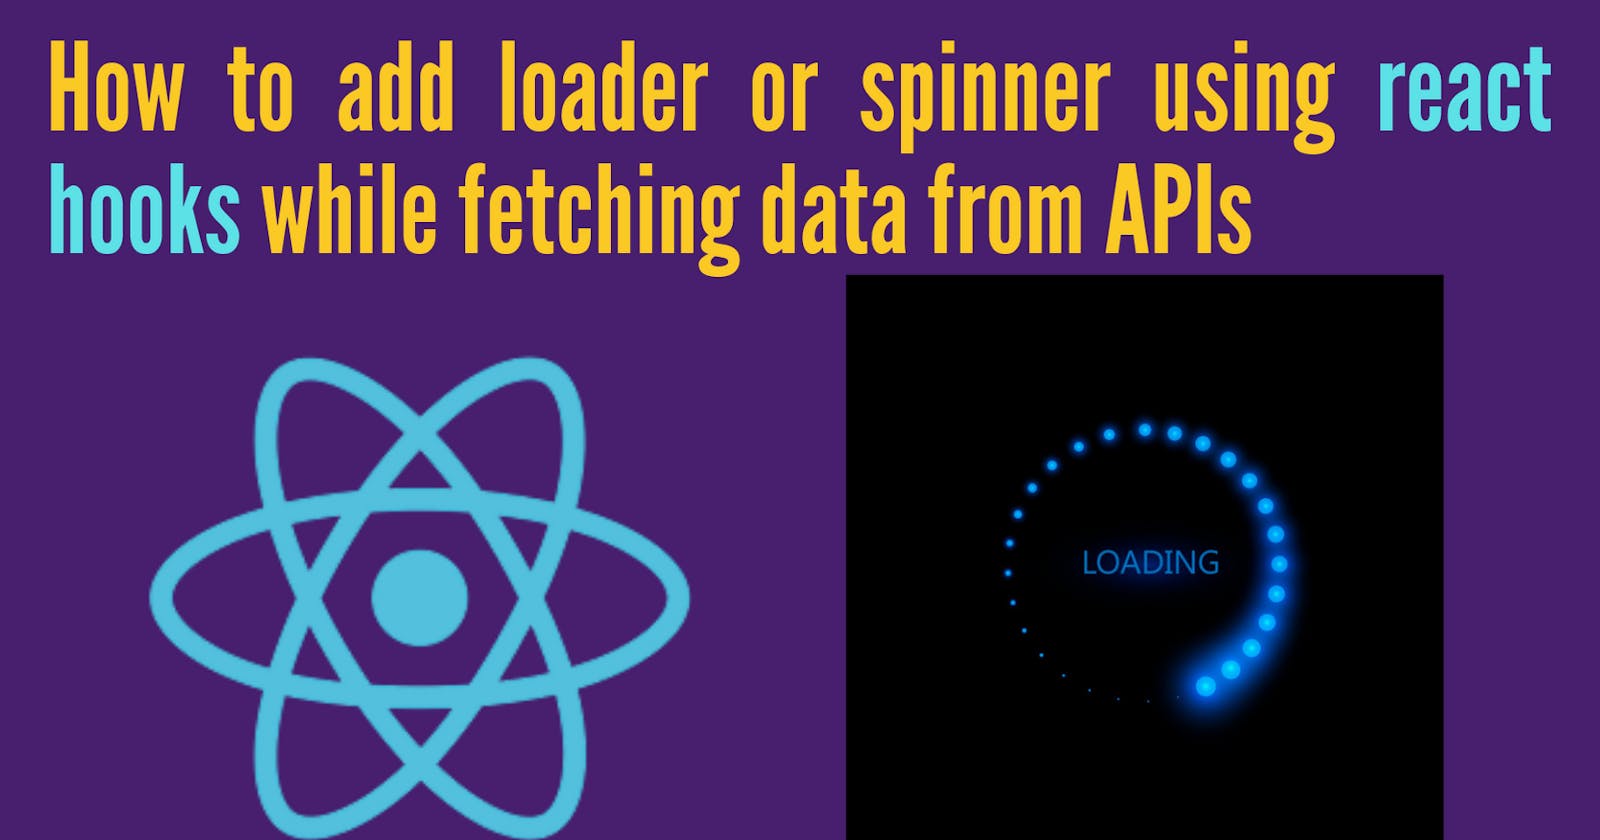 How to add loader or spinner using react hooks while fetching data from APIs.